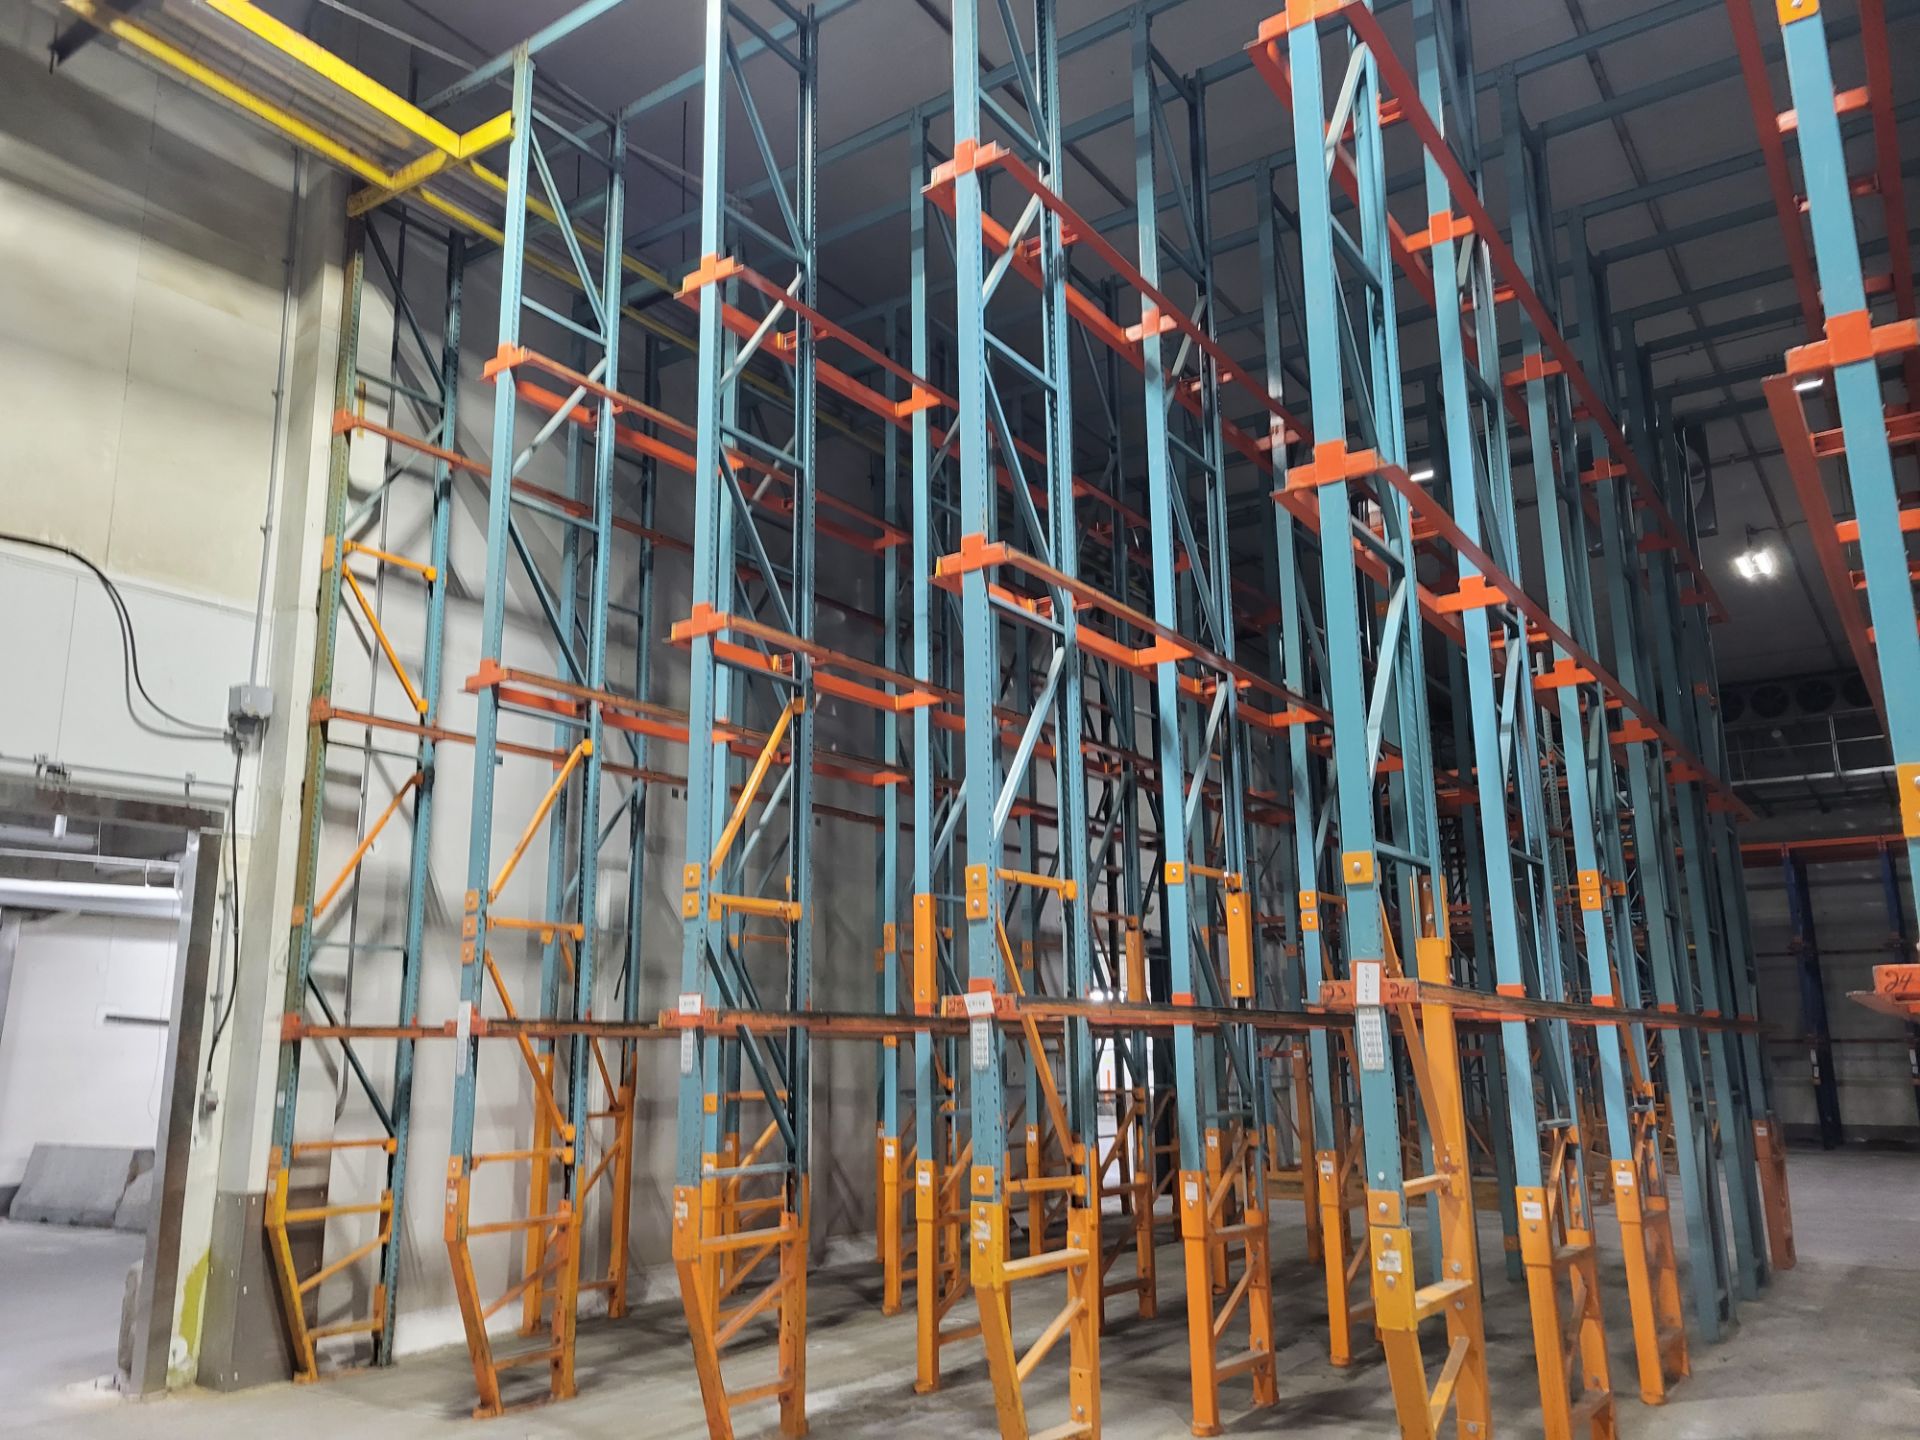 Drive Racking System 36 Rows/1500 Bays, (400) 22/25' Uprights (250) Rail Sections, (500+) Top Beams. - Image 4 of 14